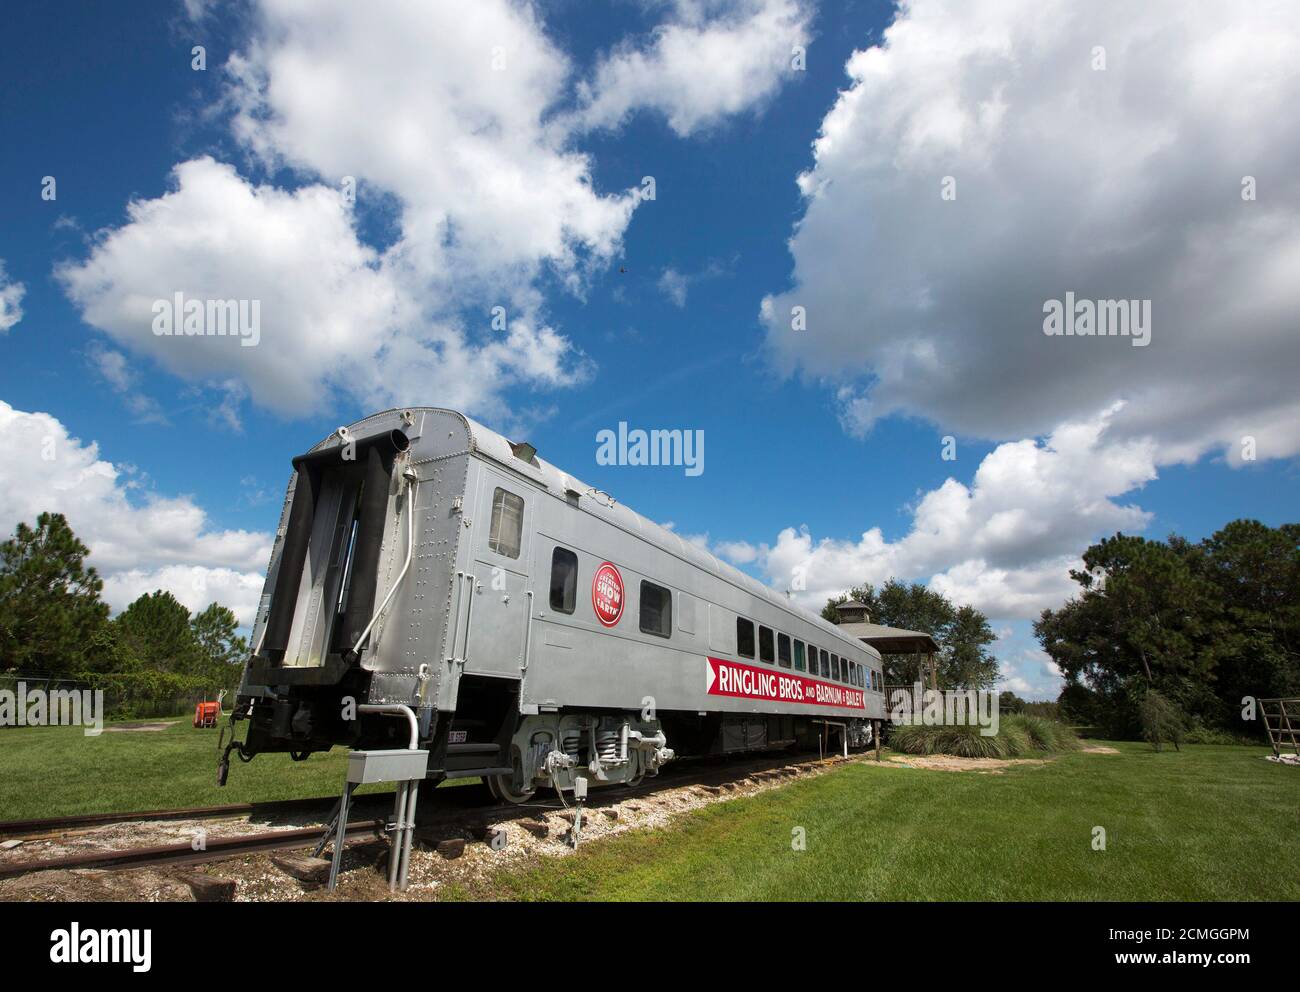 A rail line car used formerly for training the Asian Elephants sits on the property at the Ringling Bros. and Barnum & Bailey Center for Elephant Conservation in Polk City, Florida September 30, 2015. At a Florida retirement home for former circus elephants, residents enjoy a steady diet of high-quality hay and local fruits and vegetables, as well as baths and occasional walks.  Picture taken September 30, 2015. REUTERS/Scott Audette Stock Photo